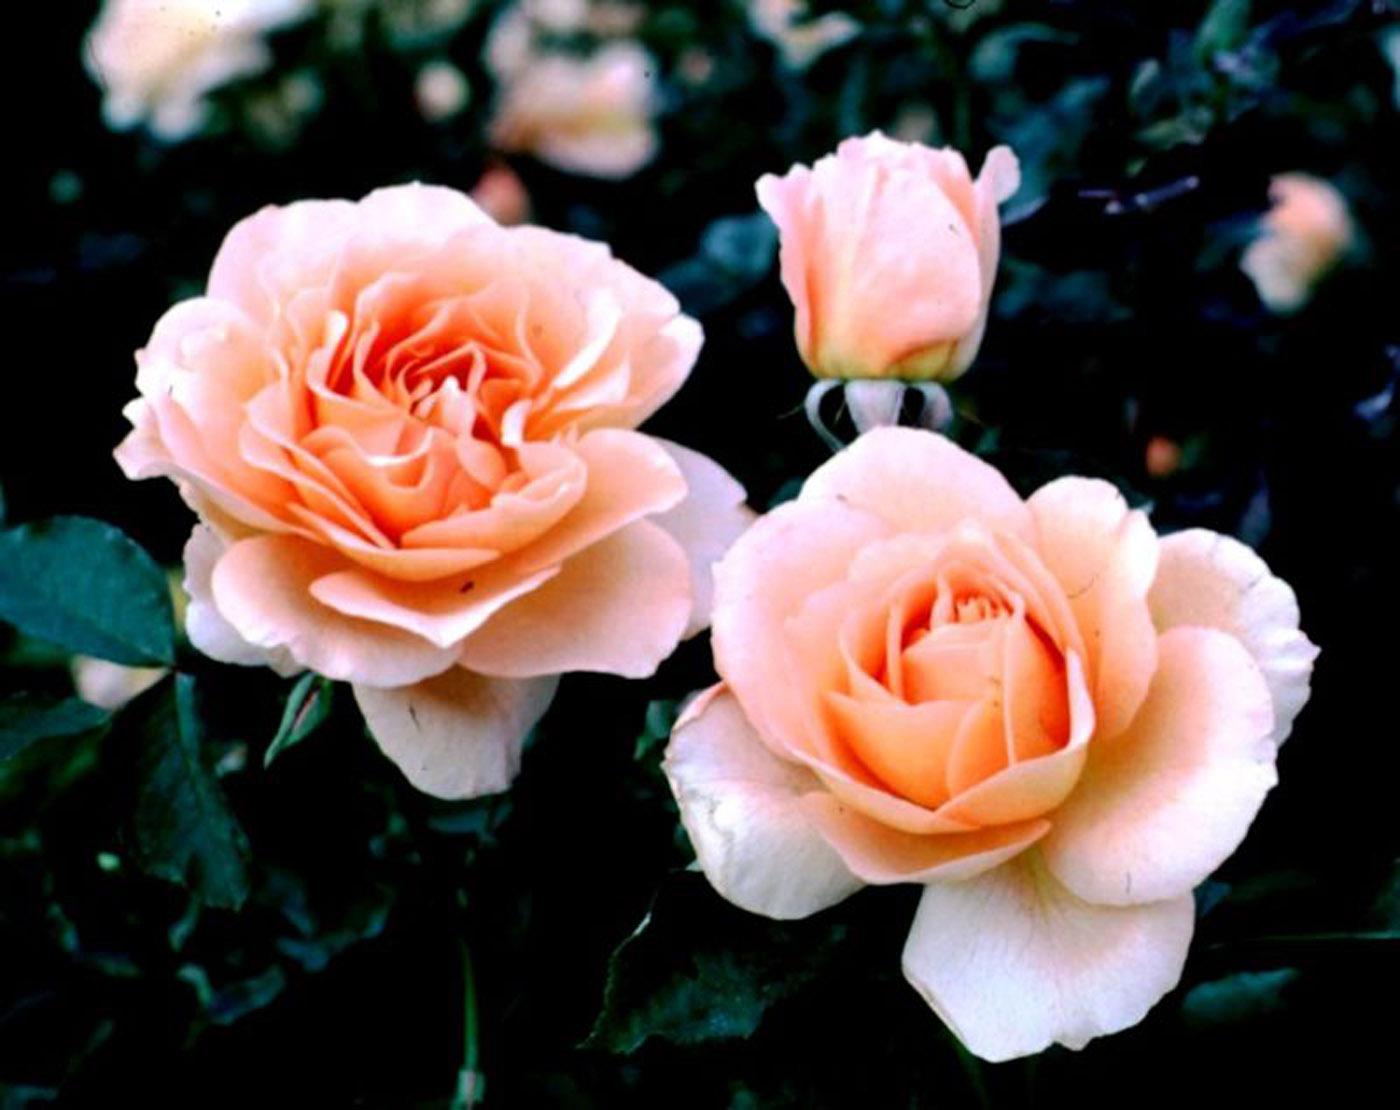 AARS winning roses are all judged on 15 key gardening characteristics including disease resistance, hardiness, color, form, flowering effect, fragrance, vigor and novelty. Winners must perform exceptionally well over a two-year period in numerous test gardens throughout the United States.